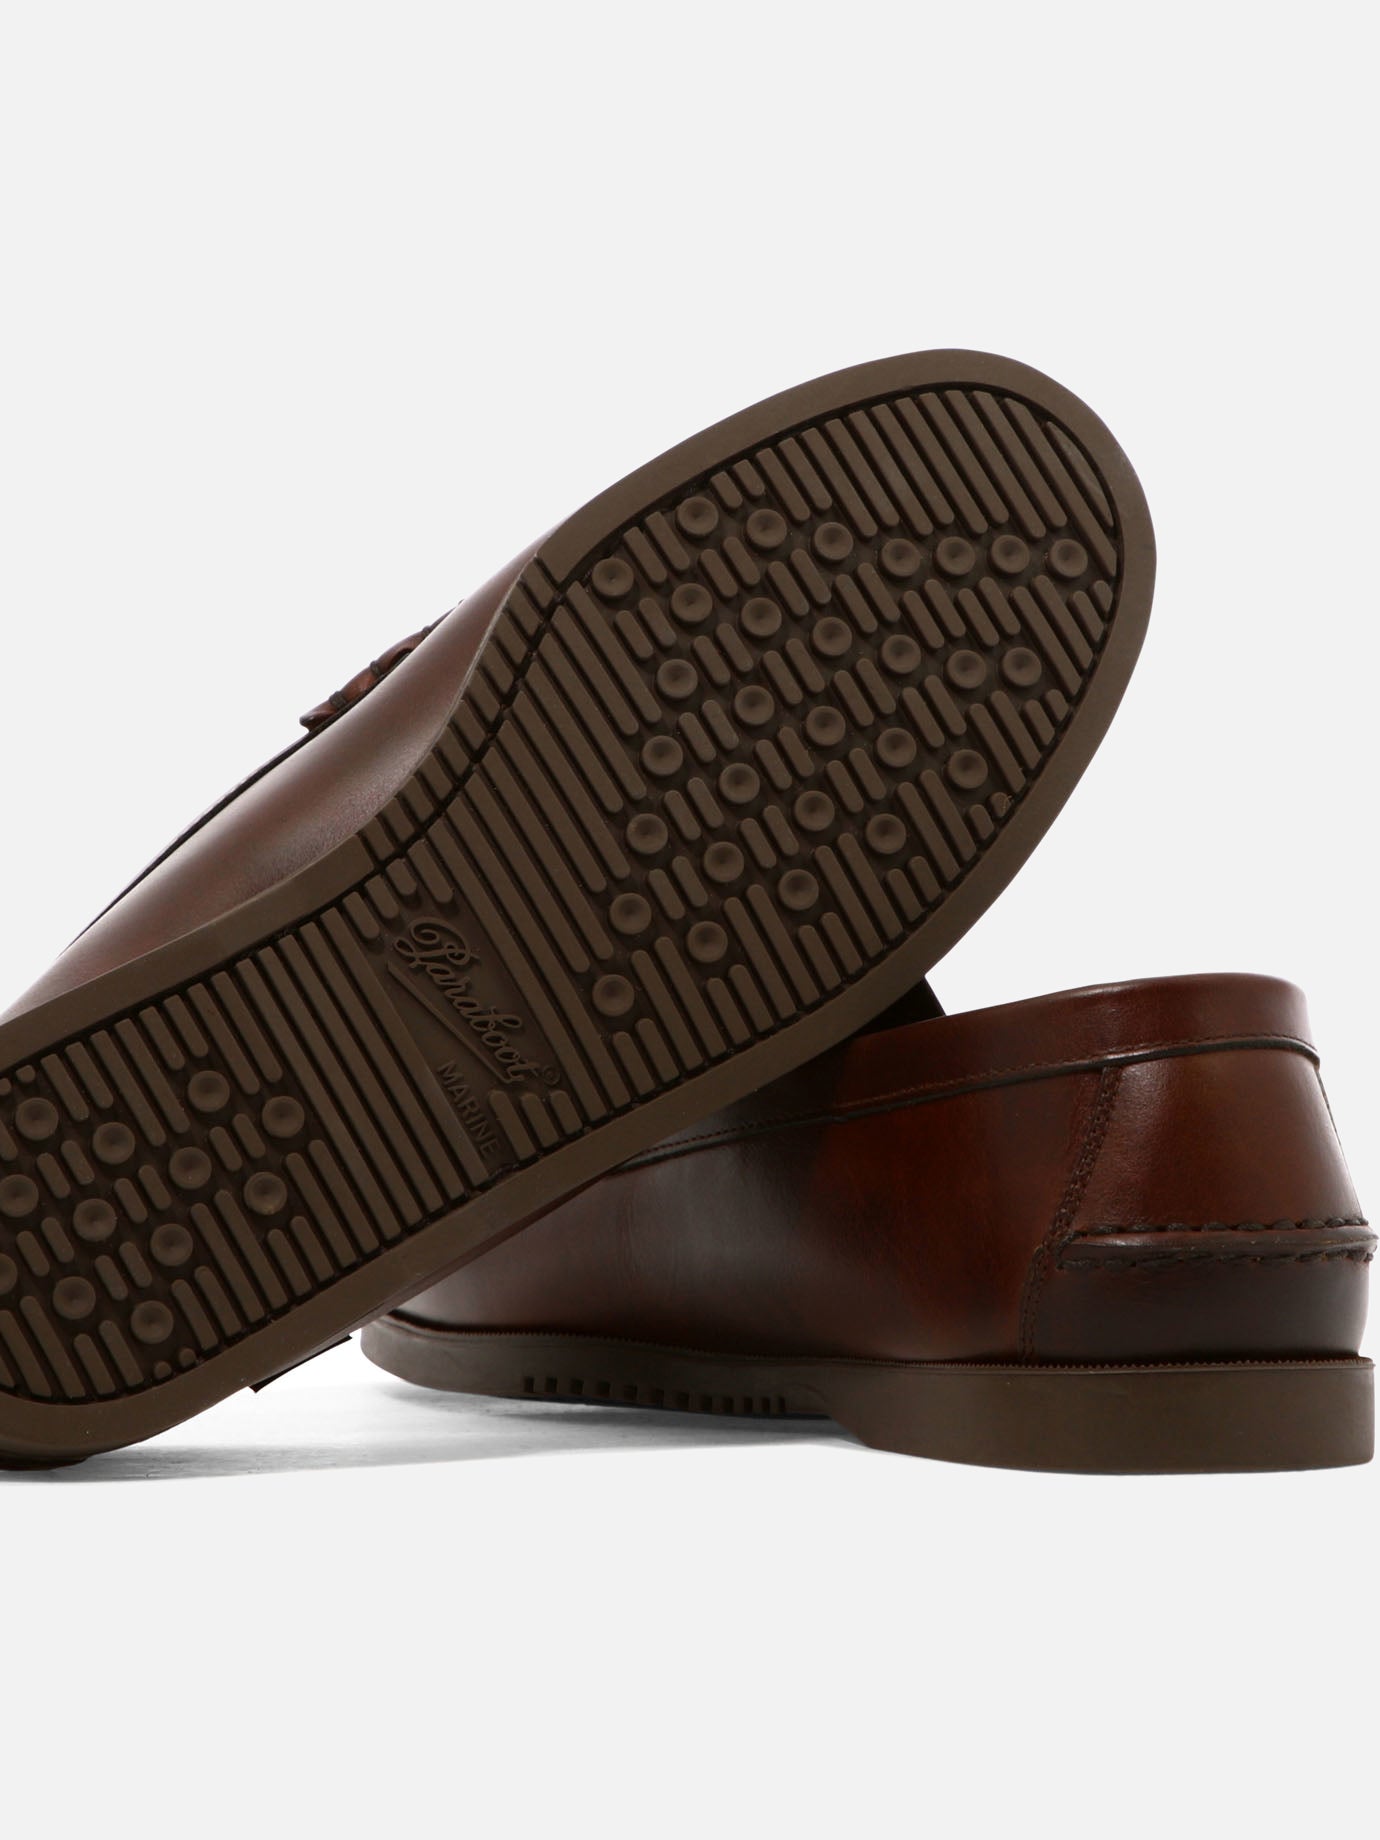 "Coraux" loafers